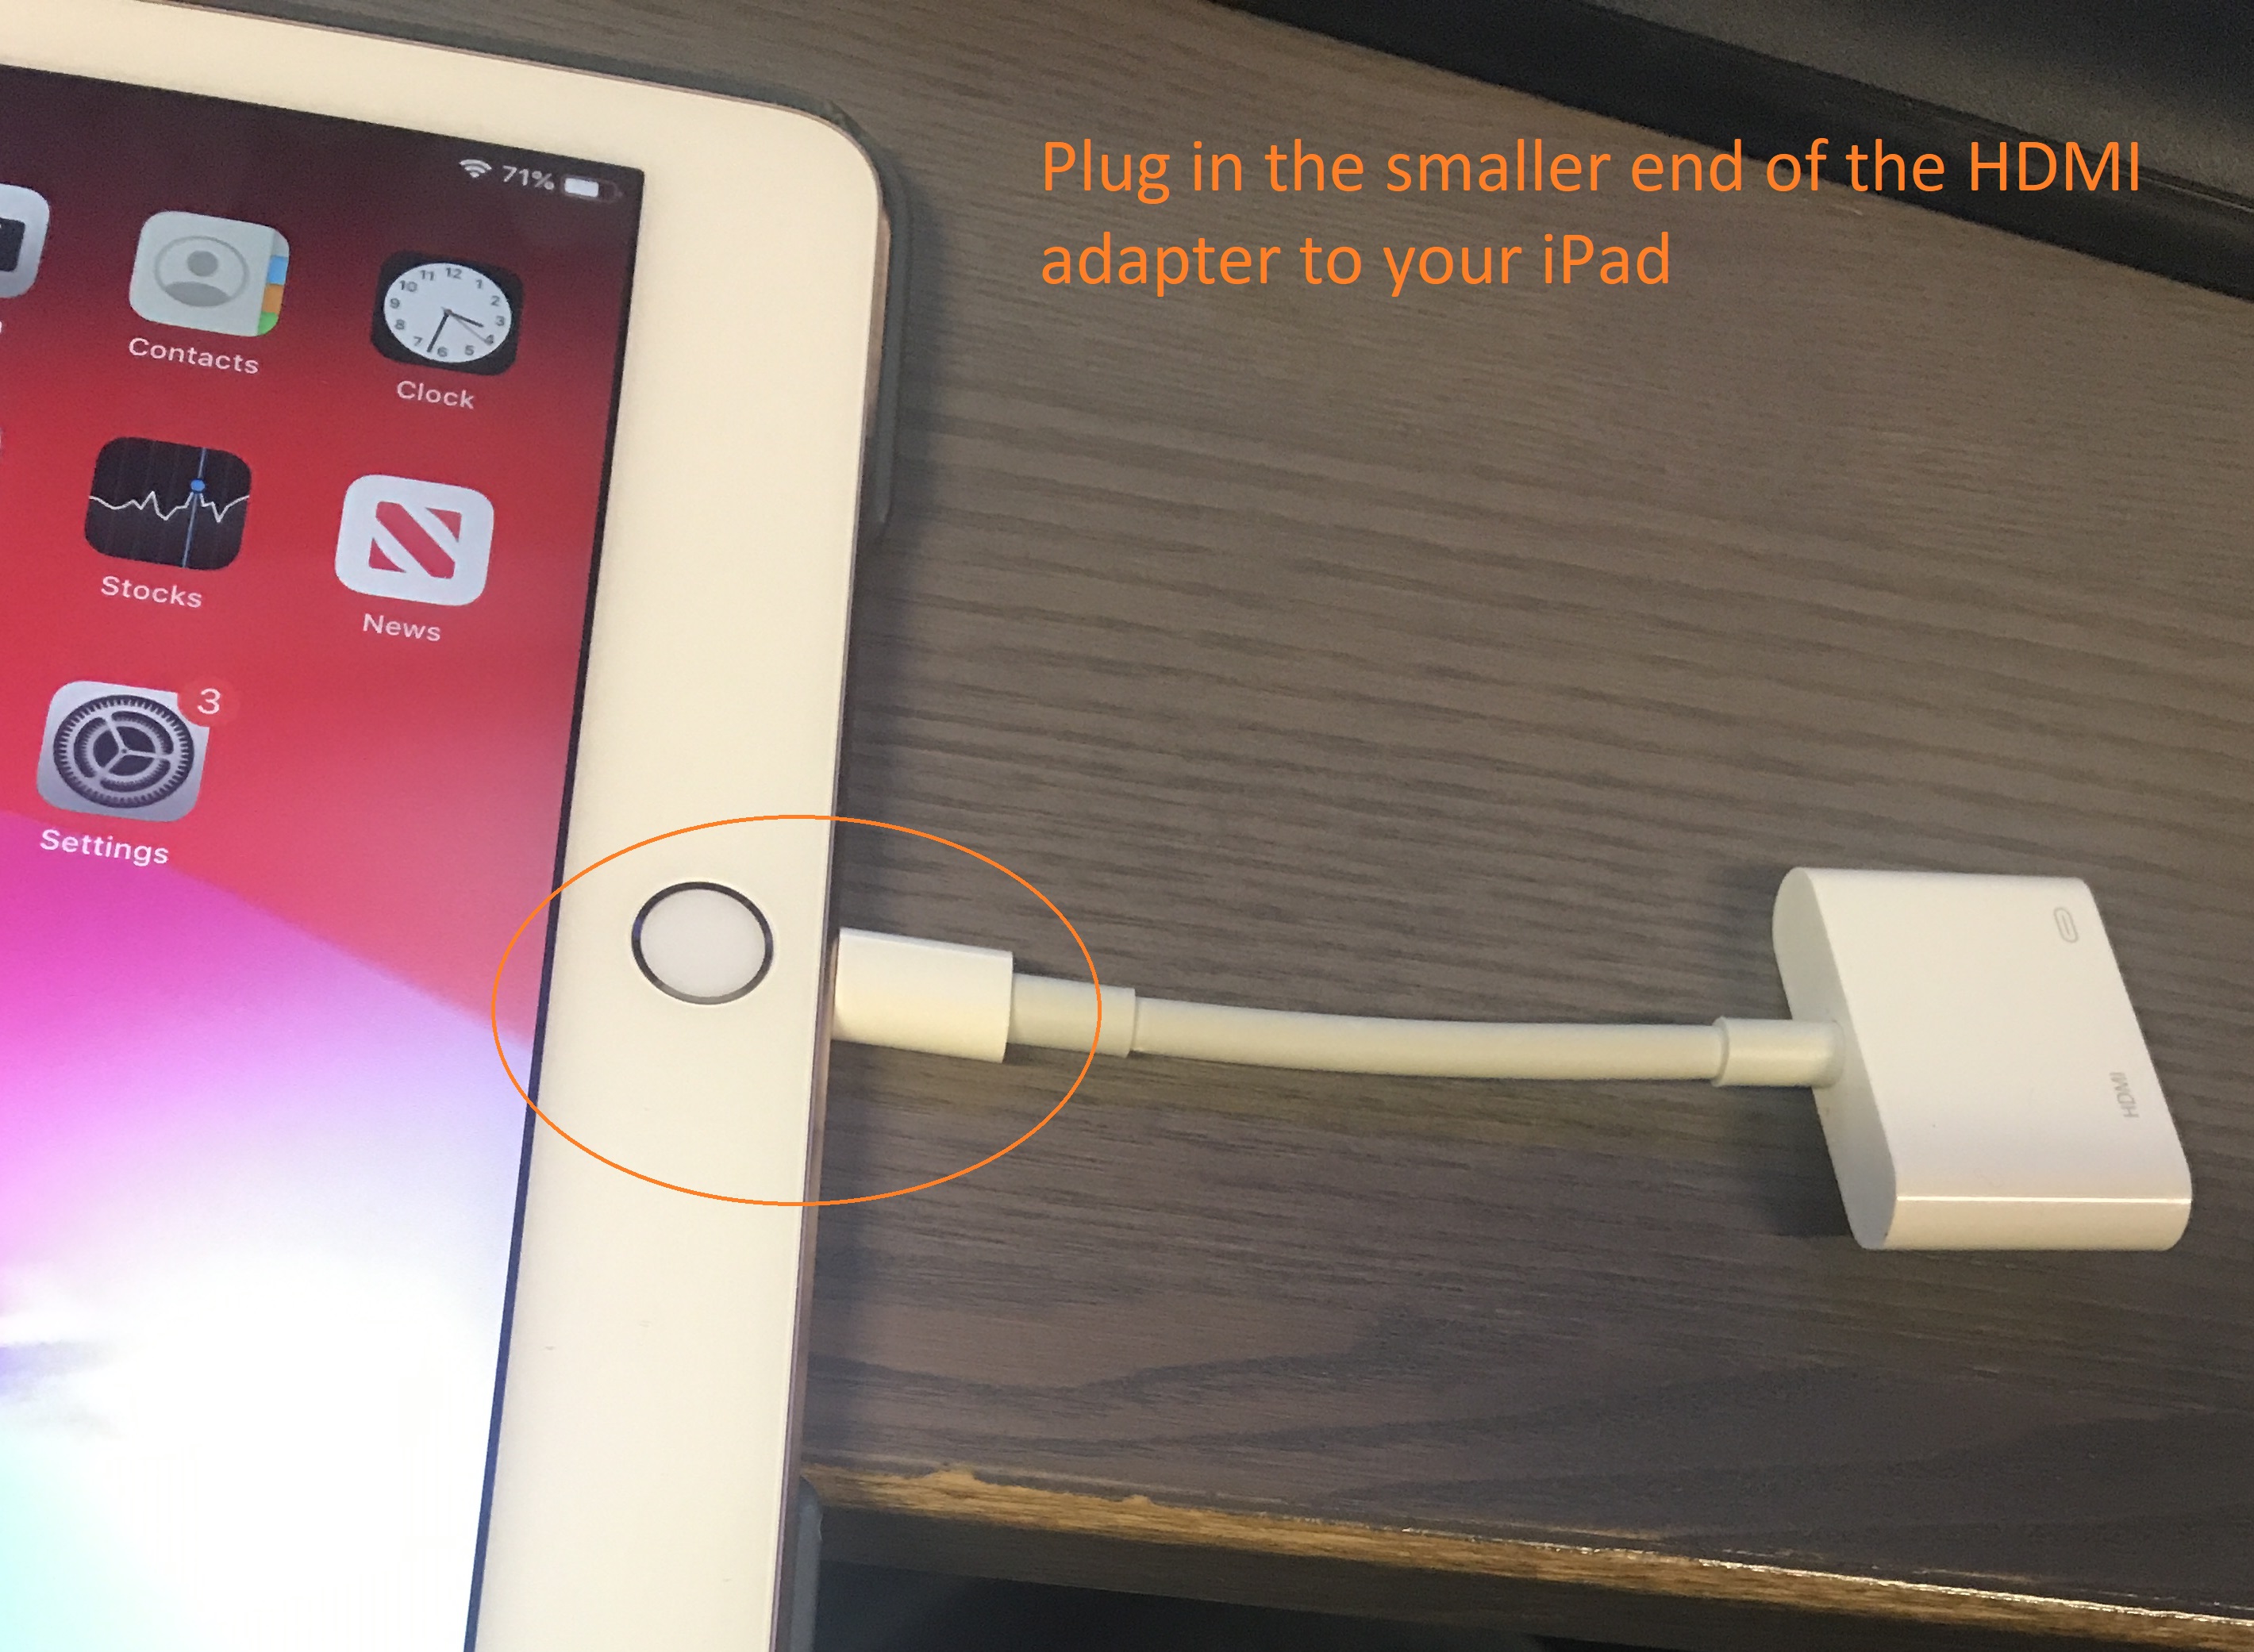 Adapter has a small rectangular plug at one end, large rectangle at the other. Small end plugged into iPad at center bottom.